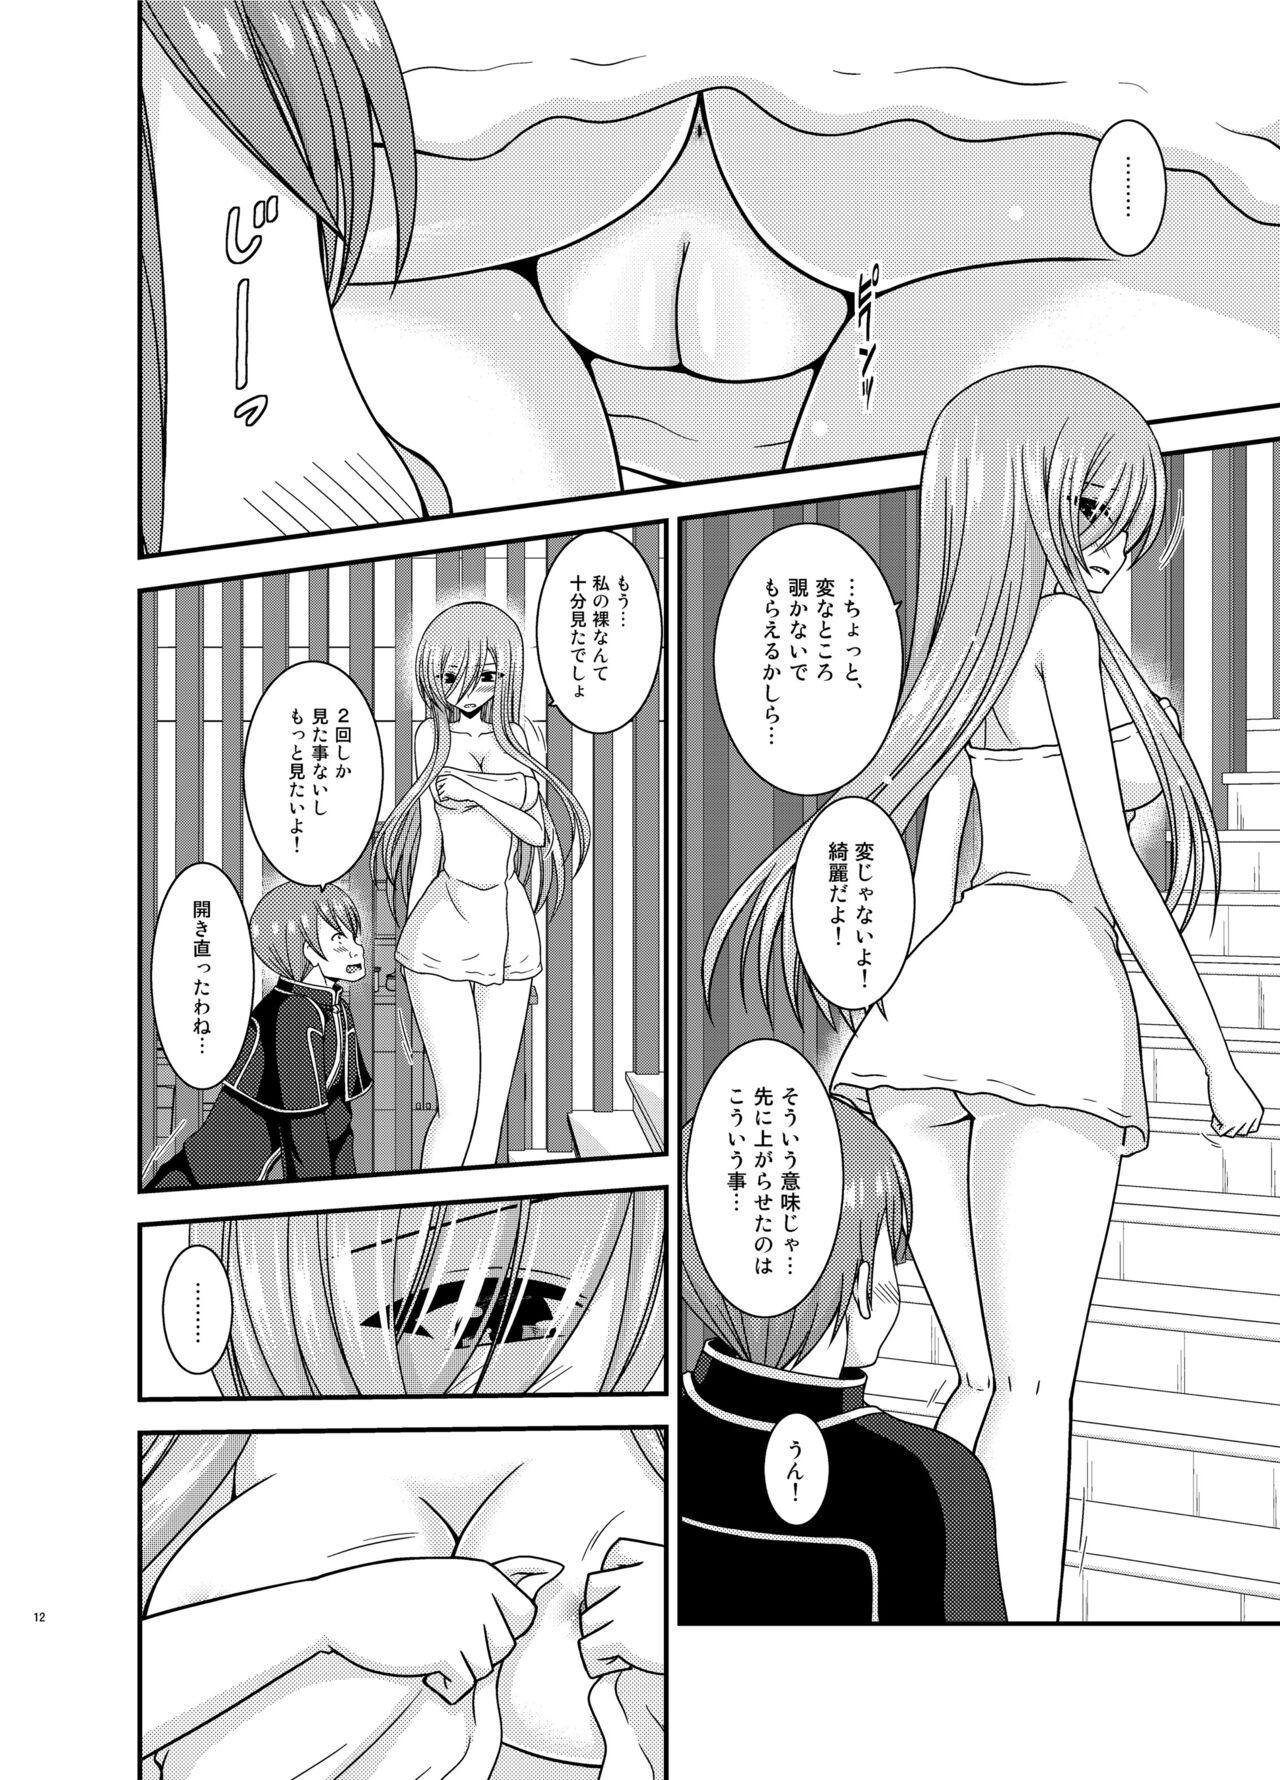 Dirty Talk Melon ga Chou Shindou! R15 - Tales of the abyss Vaginal - Page 12